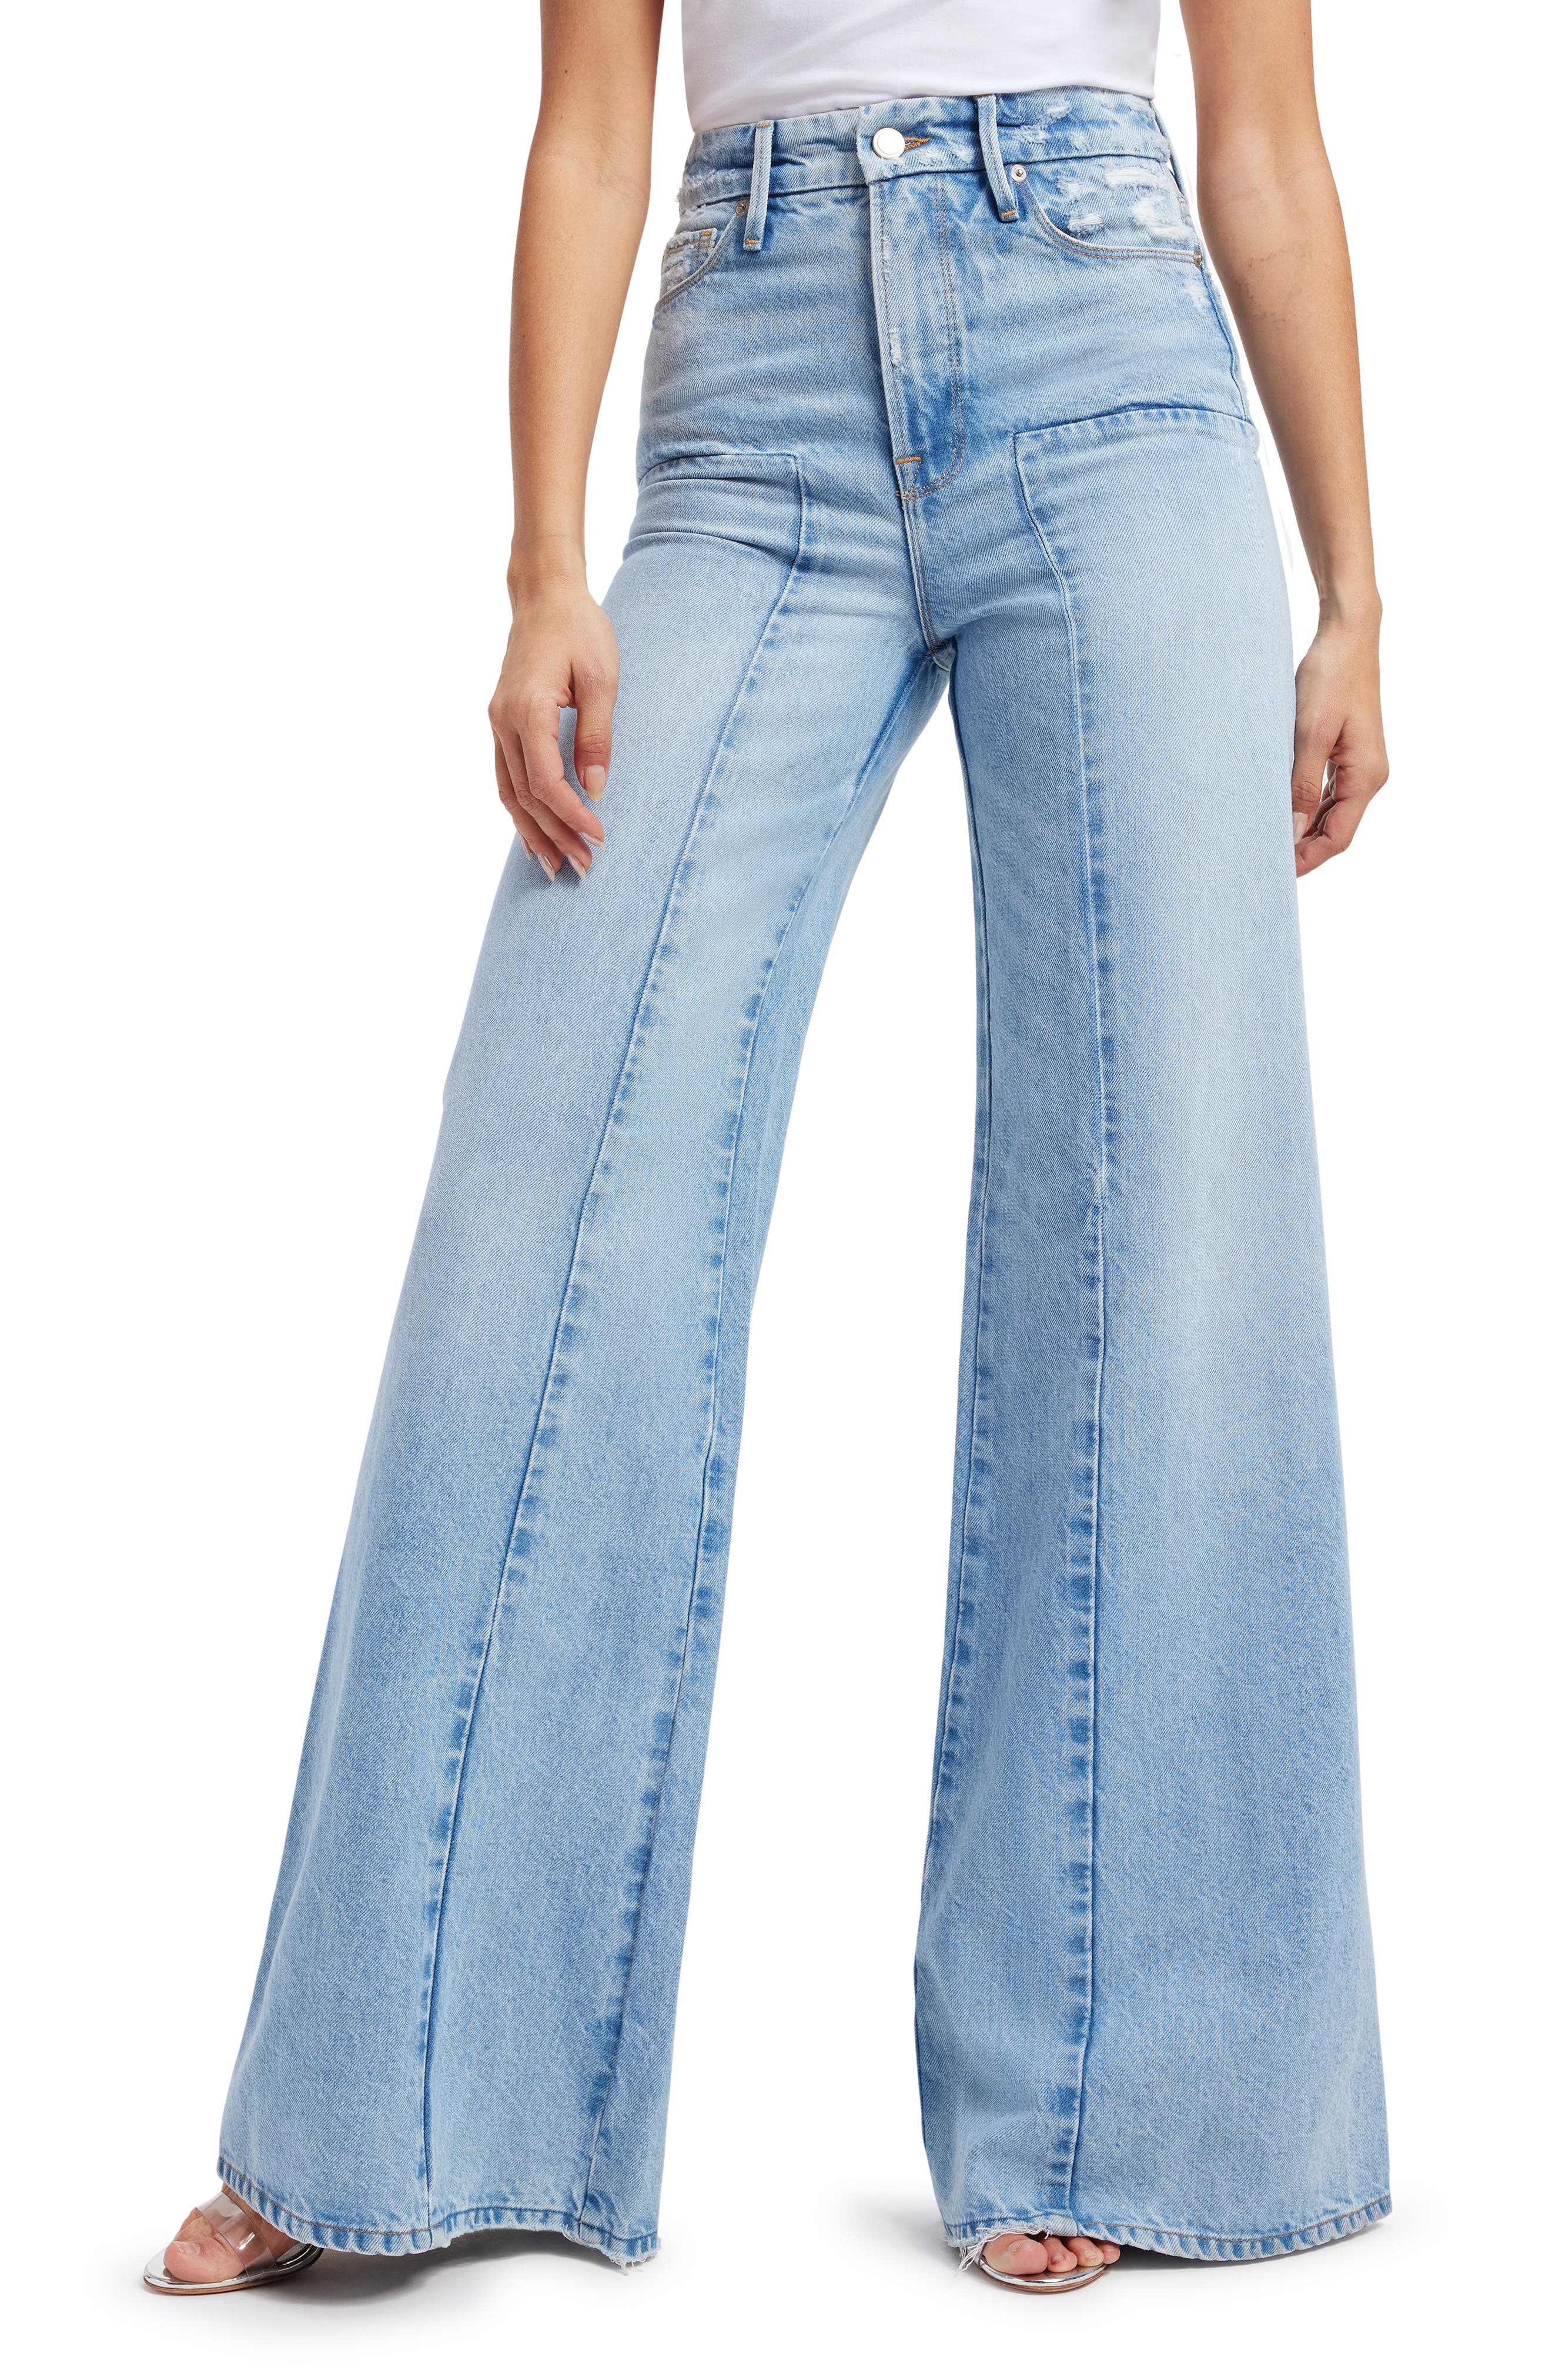 21 Ways to Wear Wide-Leg Jeans: The Outfit Ideas to Try | Who What Wear UK